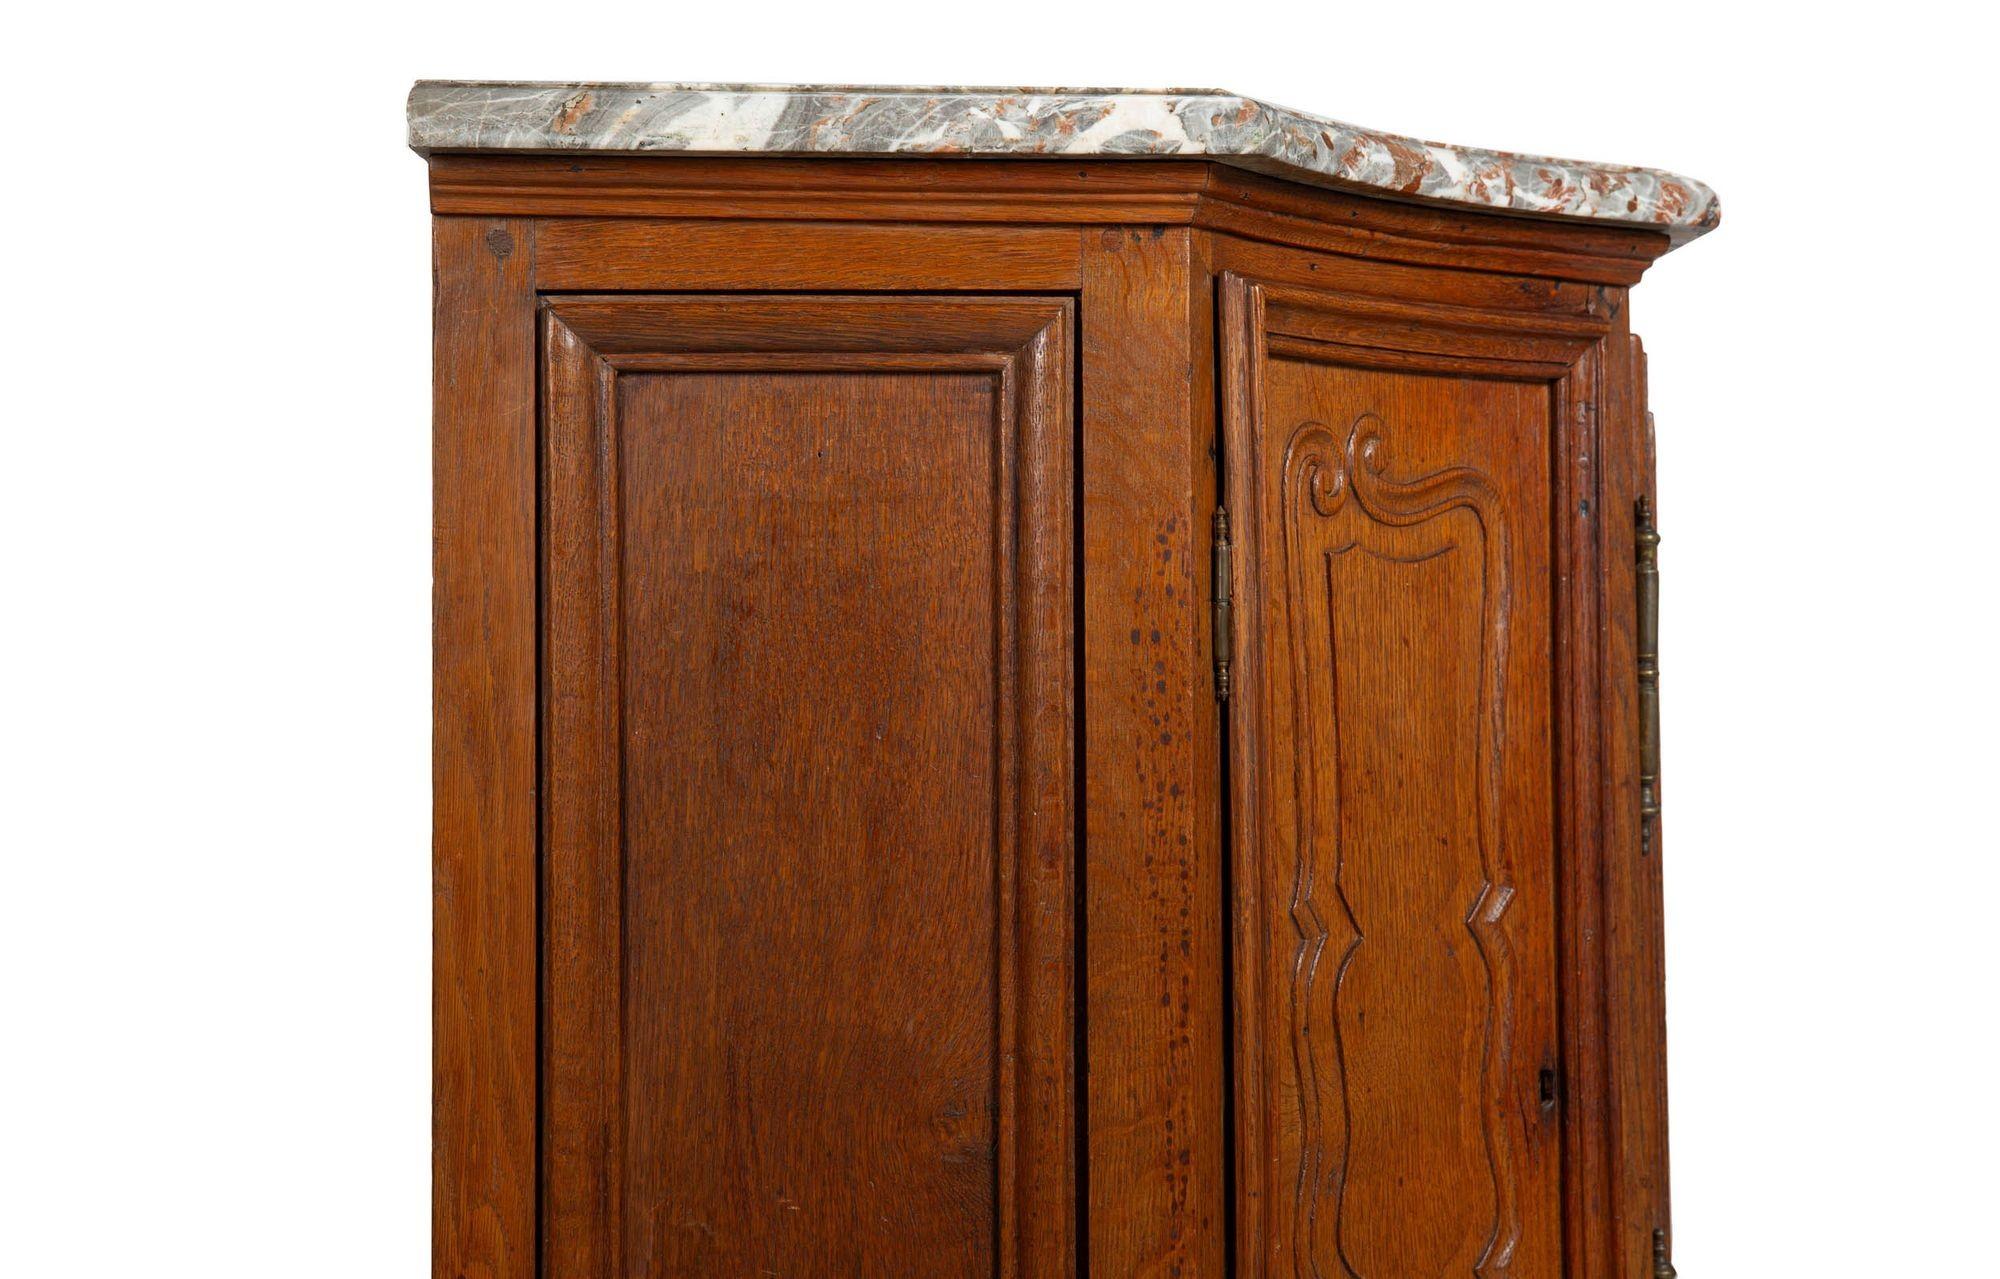 French Provincial Antique Oak and Marble Buffet Sideboard Cabinet ca. 1880 For Sale 5